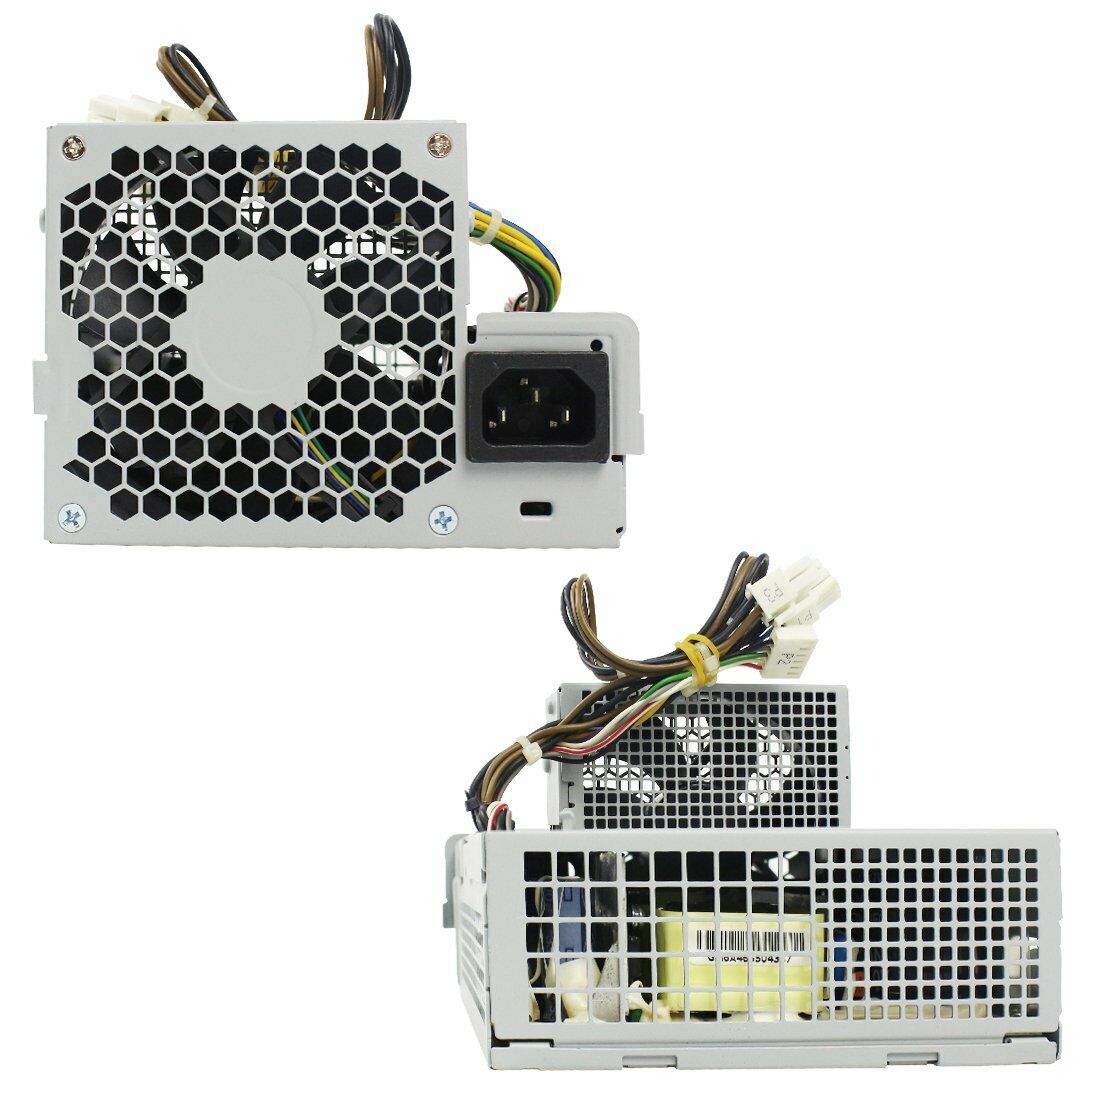 New For HP Power Supply 611481-001 611482-001 503375-001 503376-00 Elite 8300SFF